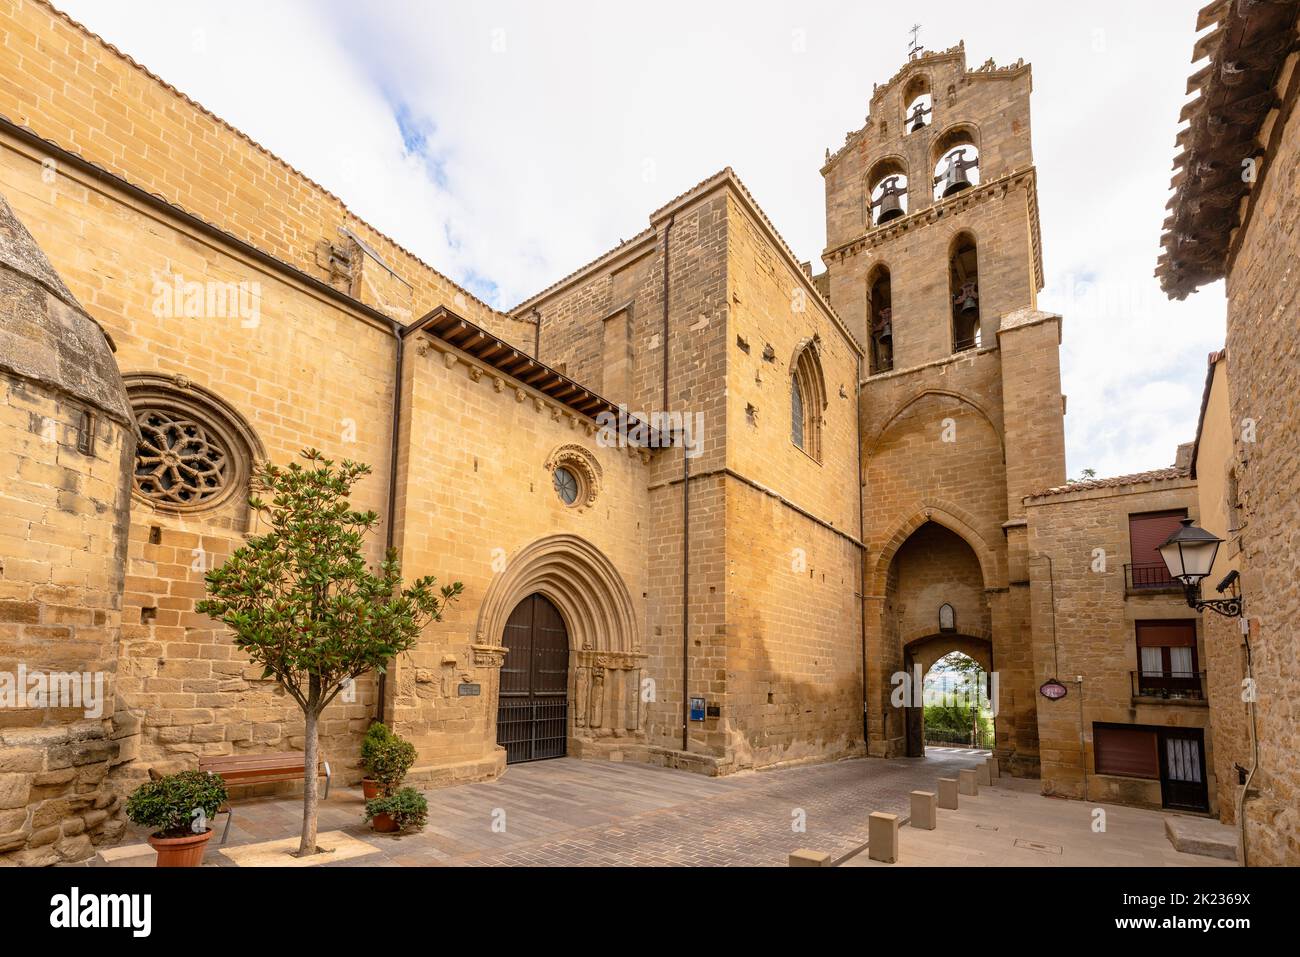 Laguardia, Spain. Saint John Baptist church and tower, medieval building that combines Romanesque and Gothic styles Stock Photo